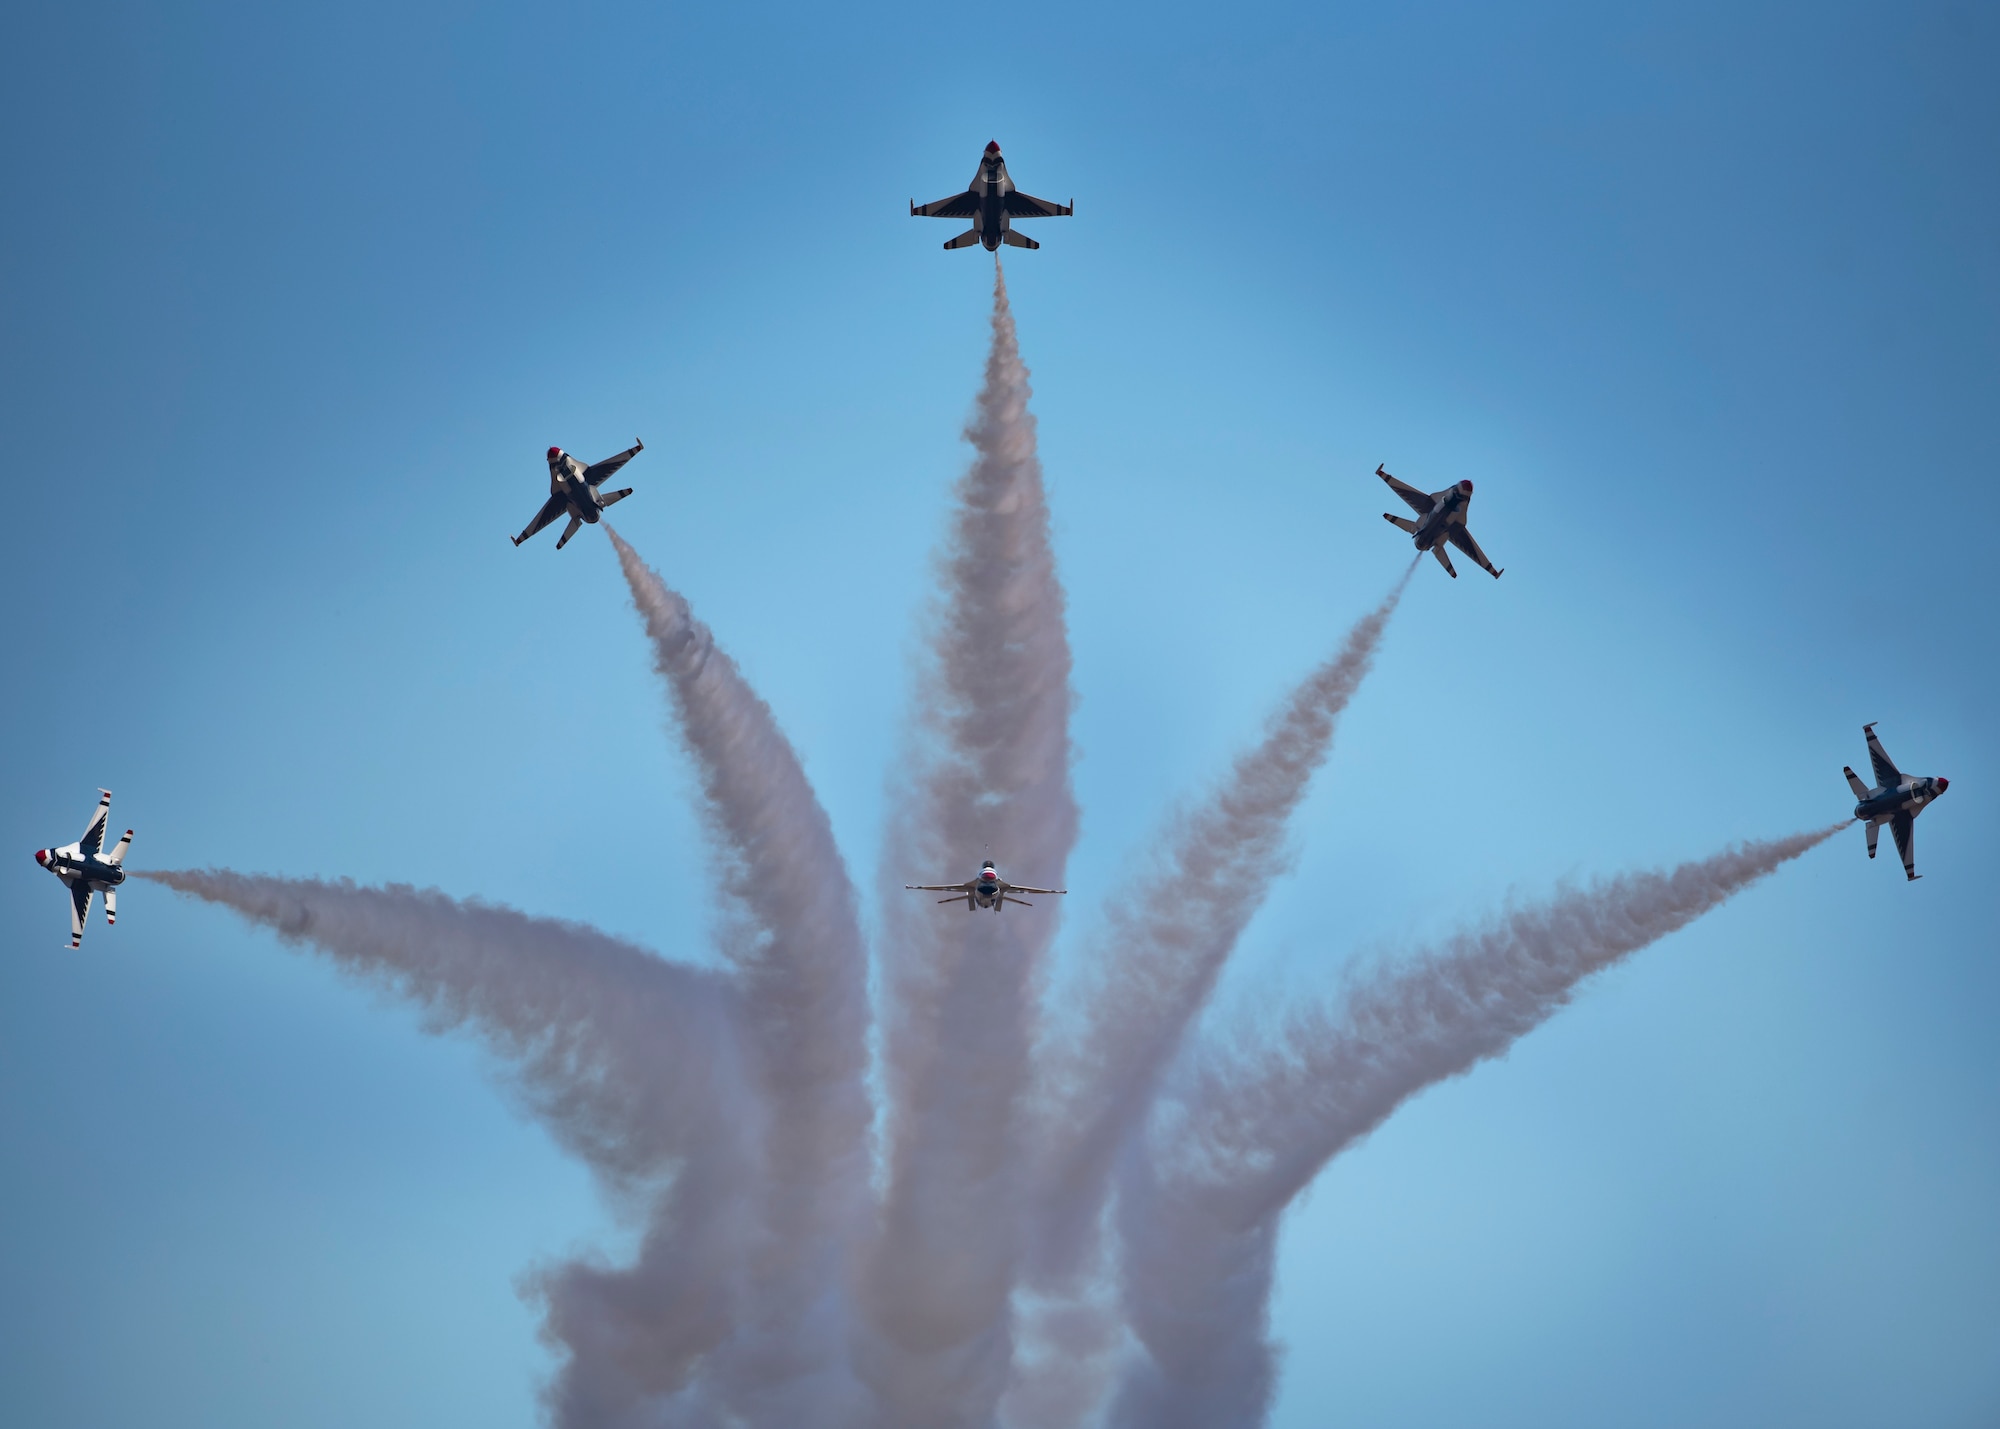 The U.S. Air Force Thunderbirds perform at the Sheppard Air Force Base Guardians of Freedom Air Show at Sheppard Air Force Base, Texas, Oct. 26, 2019. Millions of people have witnessed the Thunderbirds demonstrations, and in turn, they've seen the pride, professionalism and dedication of hundreds of thousands of Airmen serving at home and abroad. (U.S. Air Force photo by Airman 1st Class Pedro Tenorio)